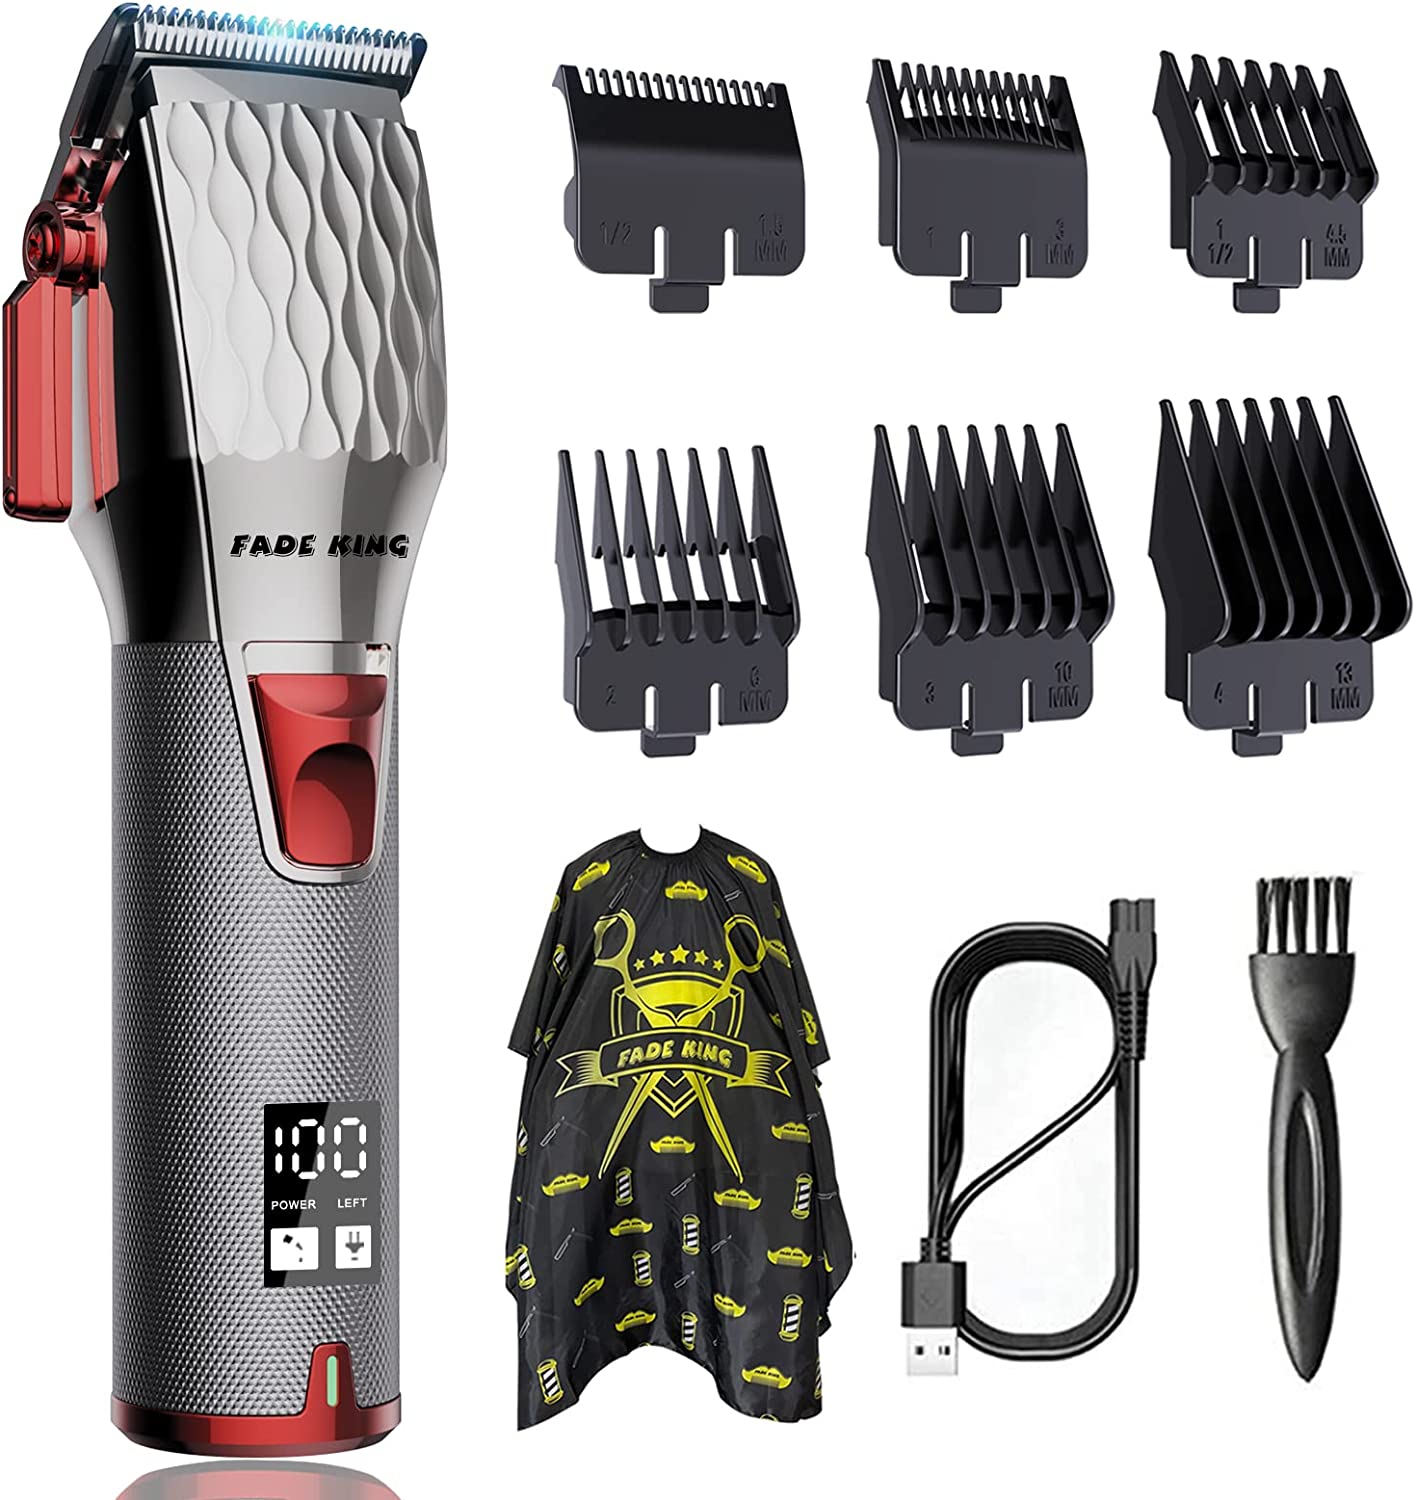 Hair Clippers for Men, Electric Hair Clippers for Men Professional Cordless Barber Clippers Rechargeable Beard Trimmer LED Display Metal Case